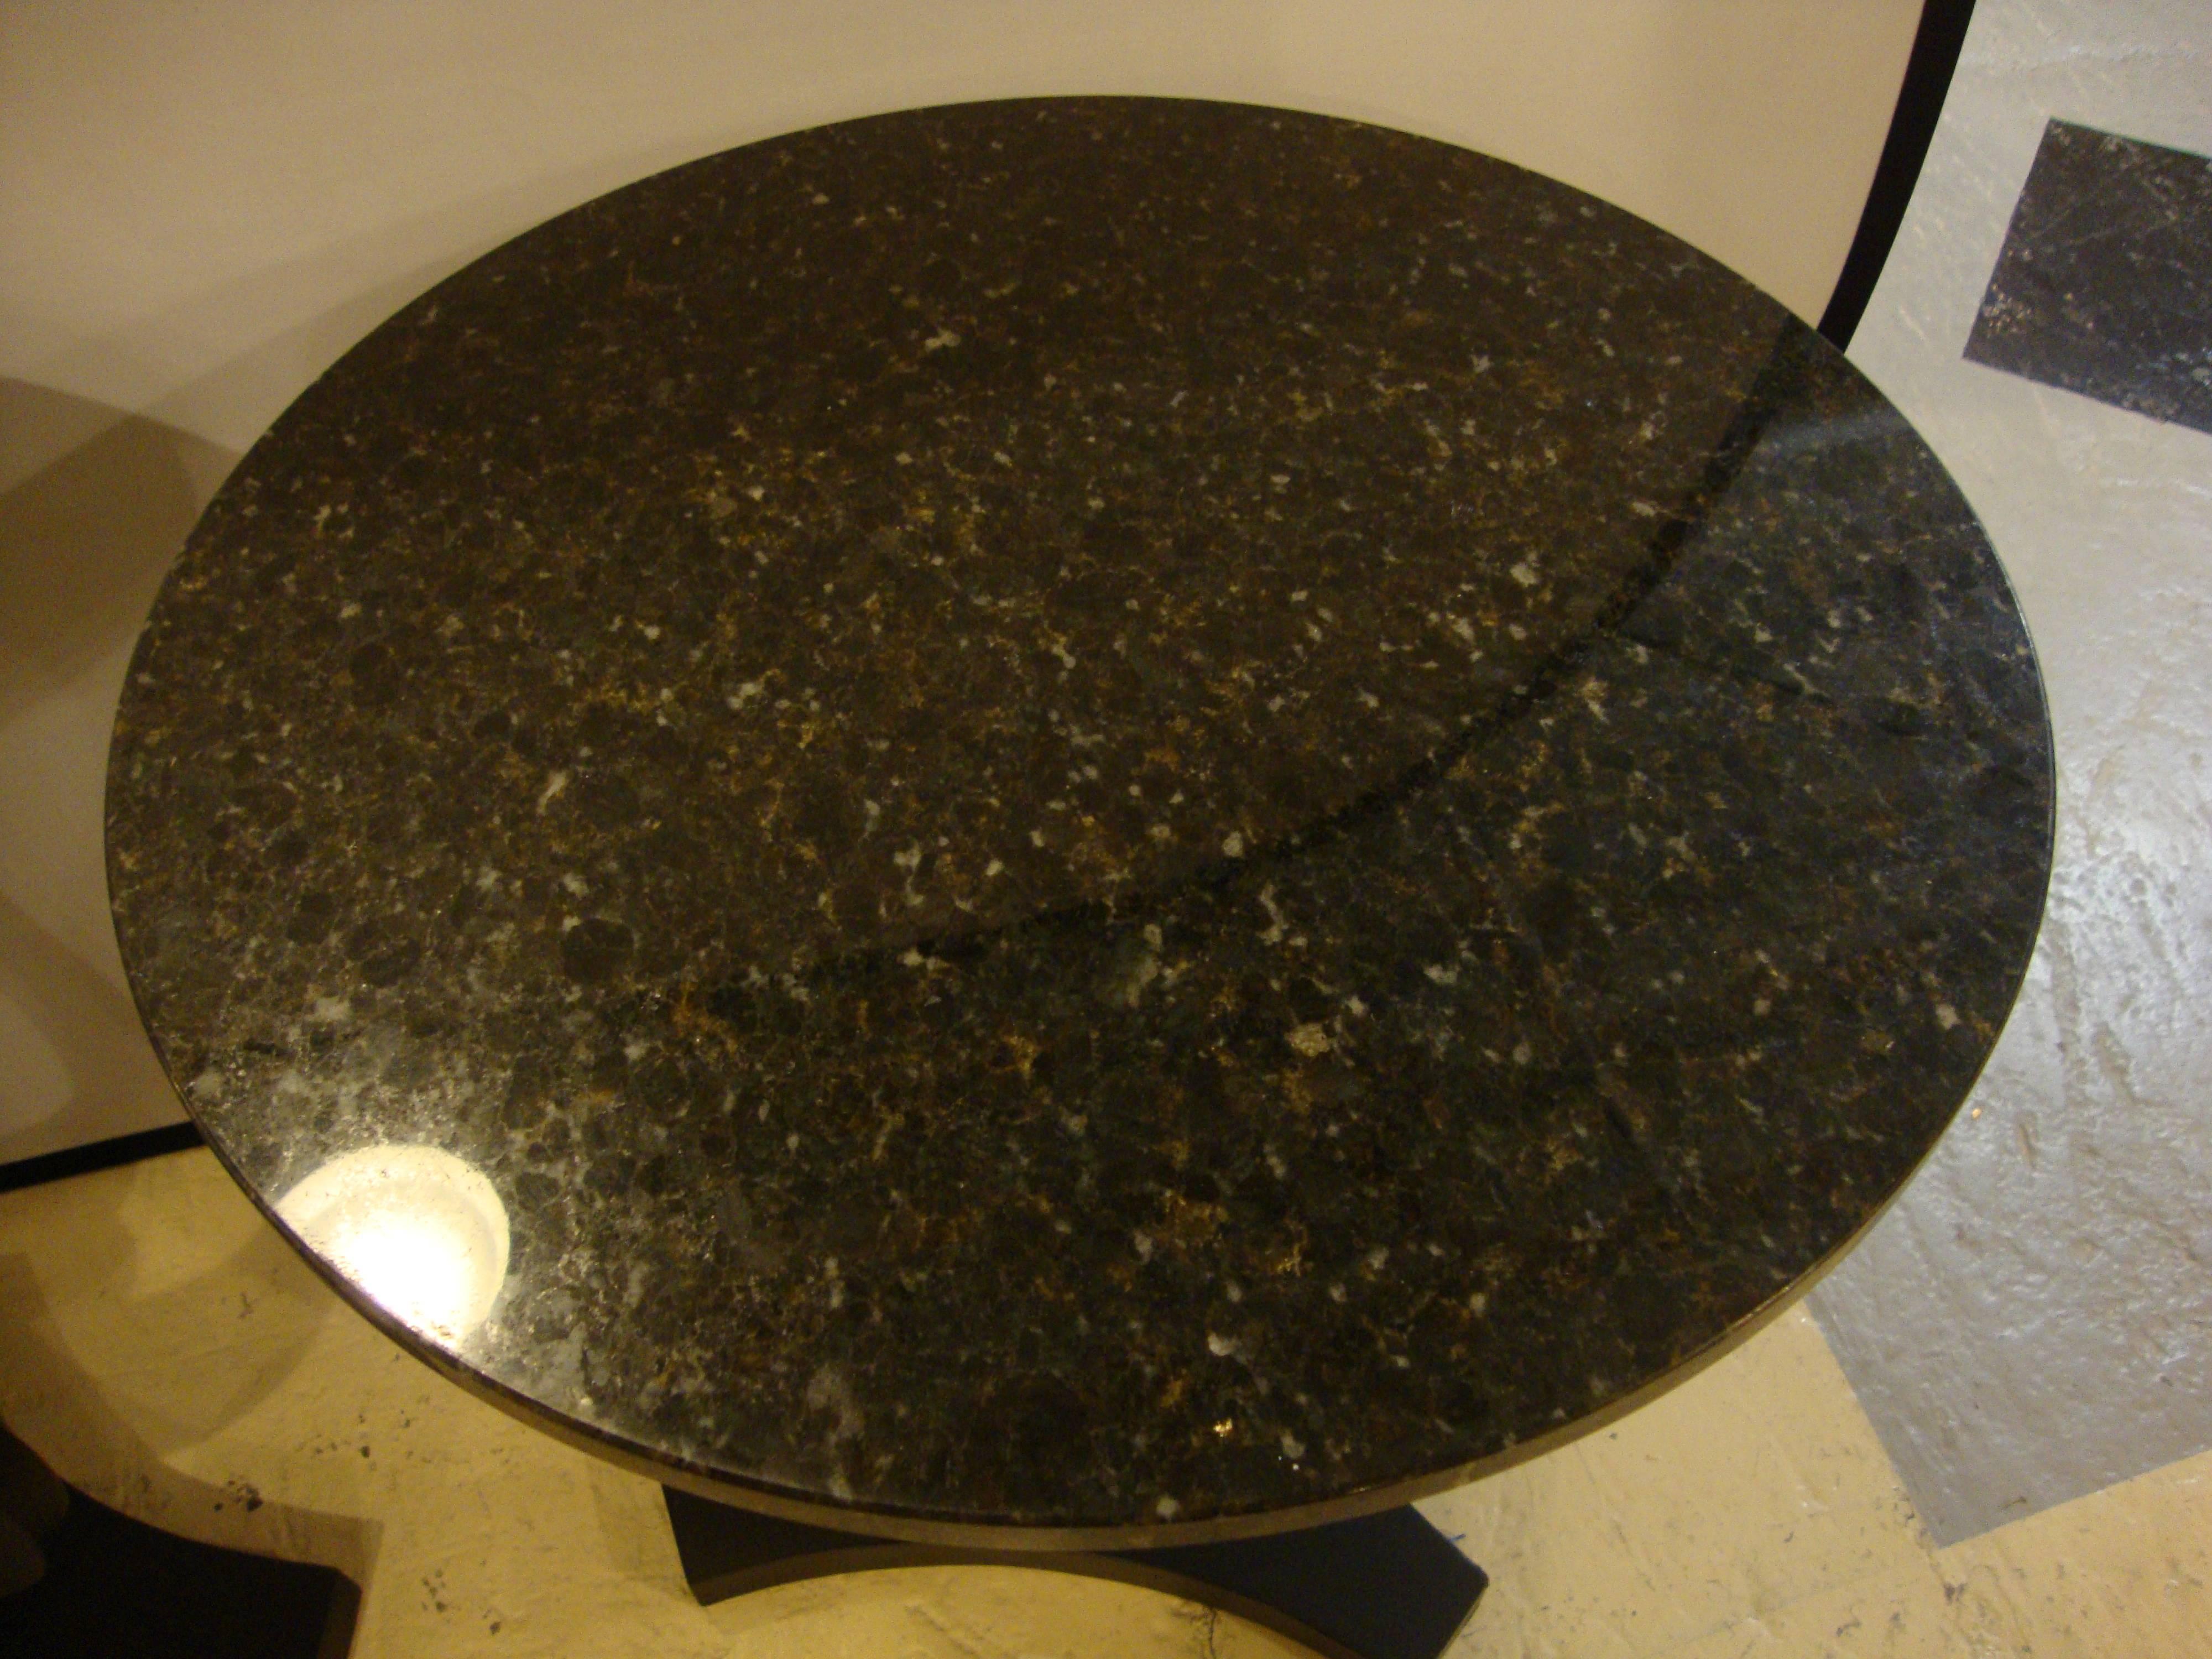 Pair of Art Deco Ebony Based End Tables with Black Marble Tops For Sale 4